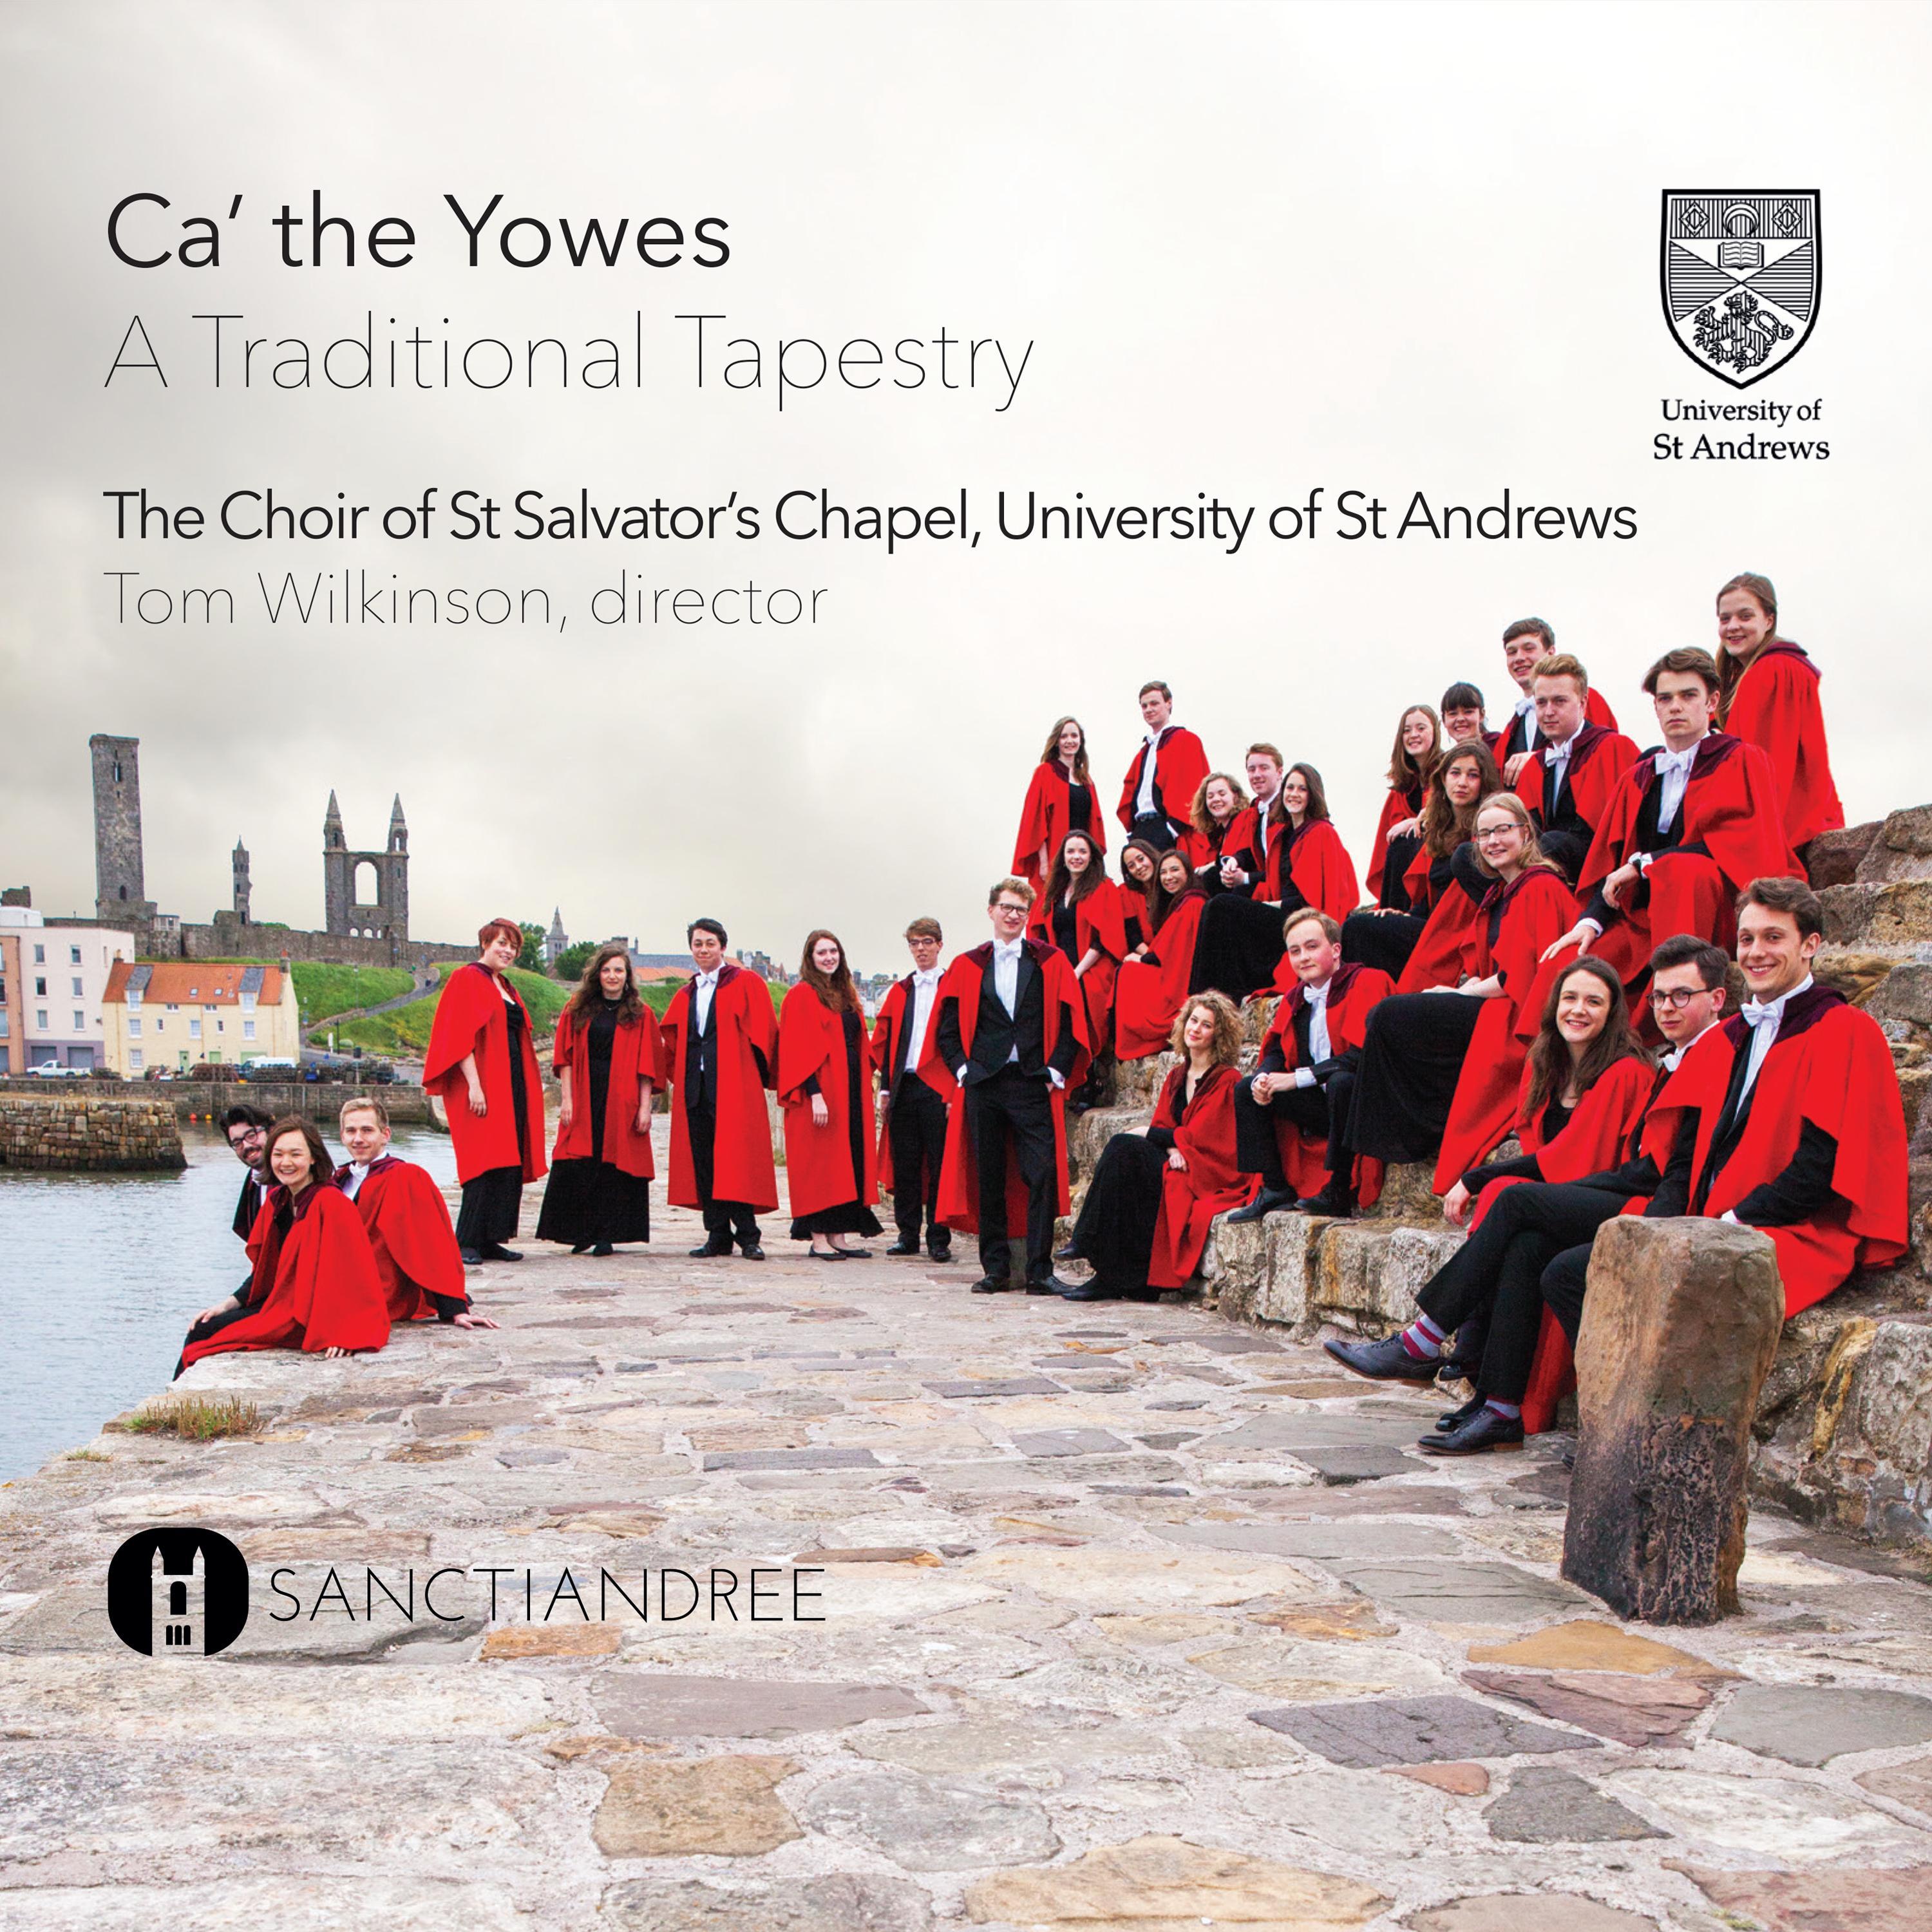 Ca' the Yowes  A Traditional Tapestry